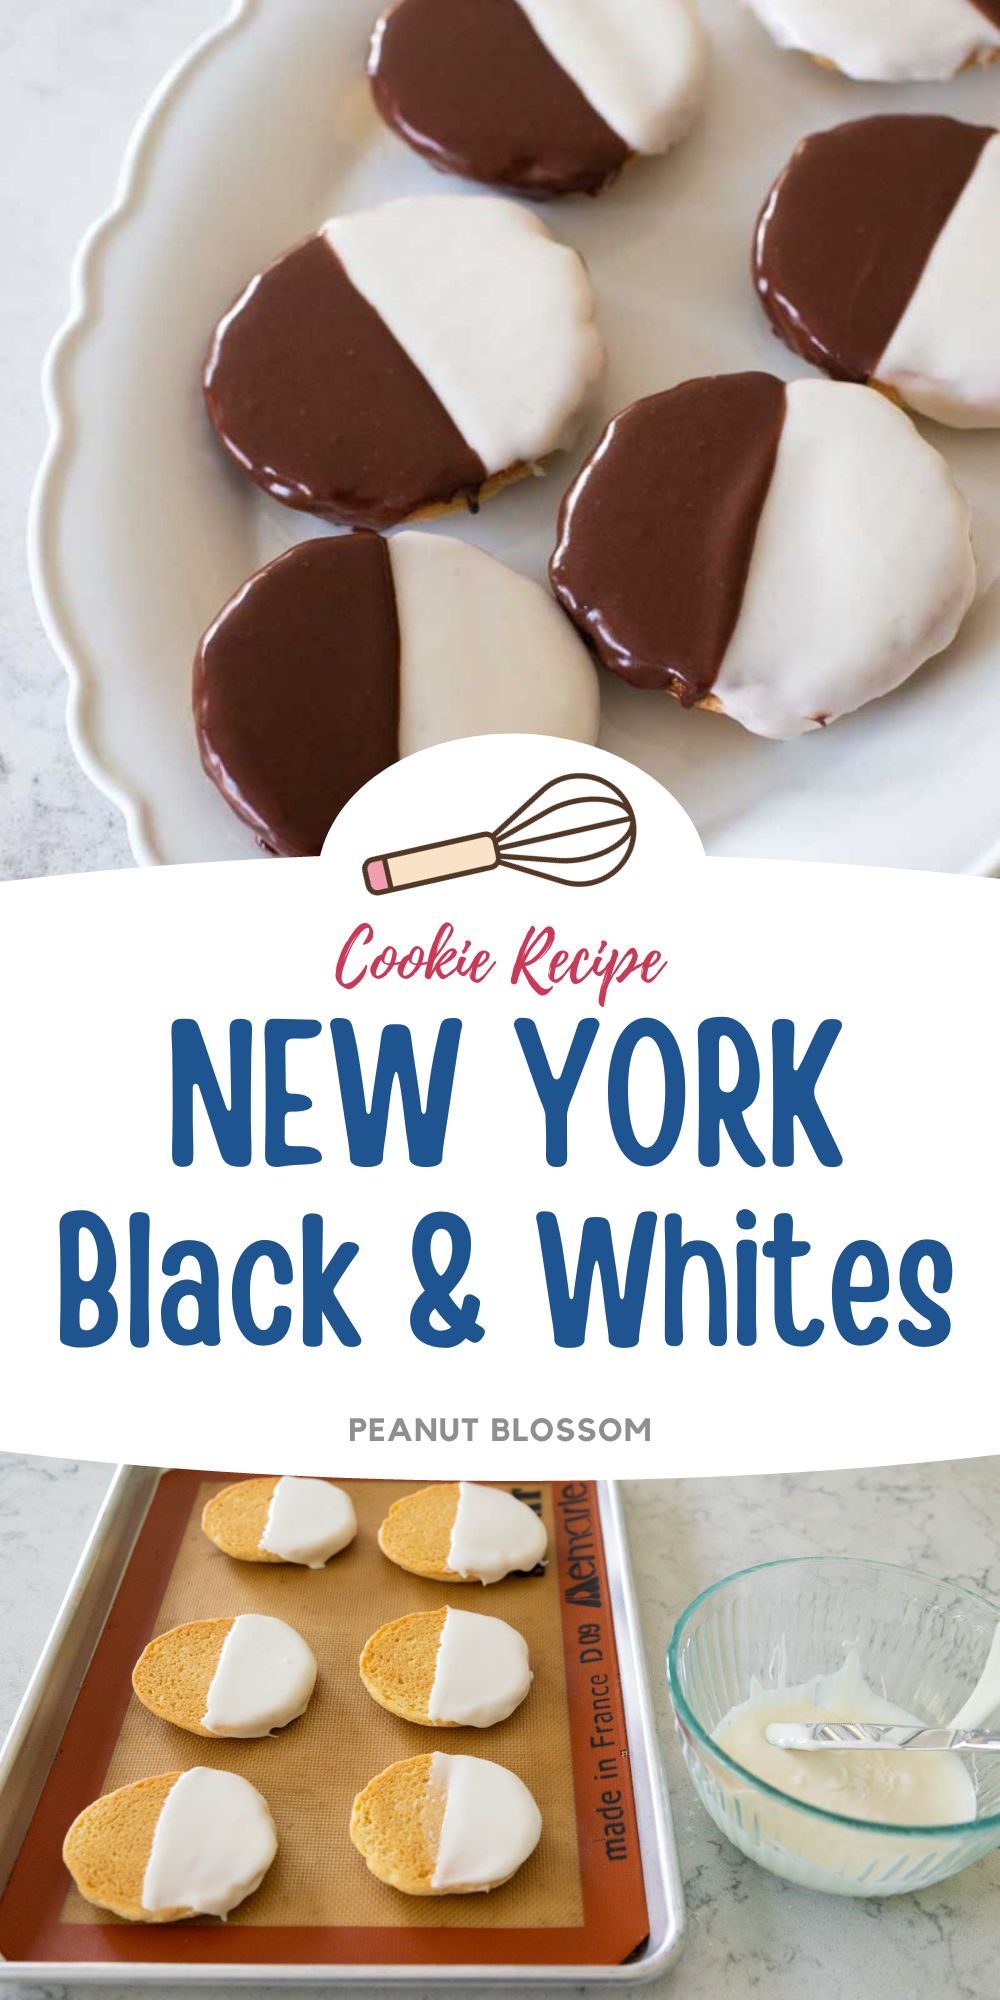 The photo collage shows the finished black and white cookies on a platter next to a photo of them being iced with the white icing.